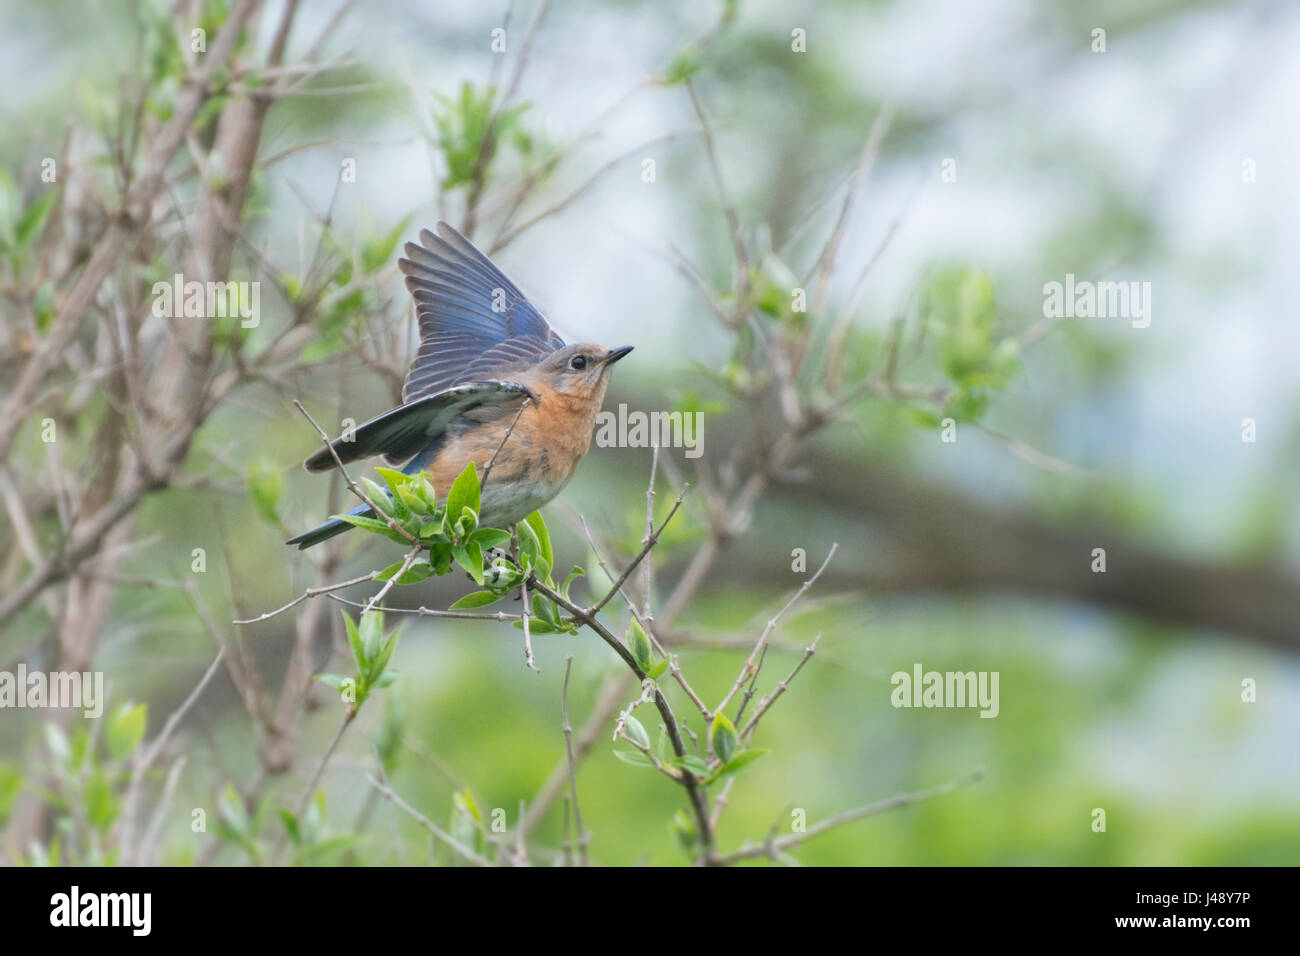 Eastern Bluebird female flaps wings from perch on budding twig Stock Photo